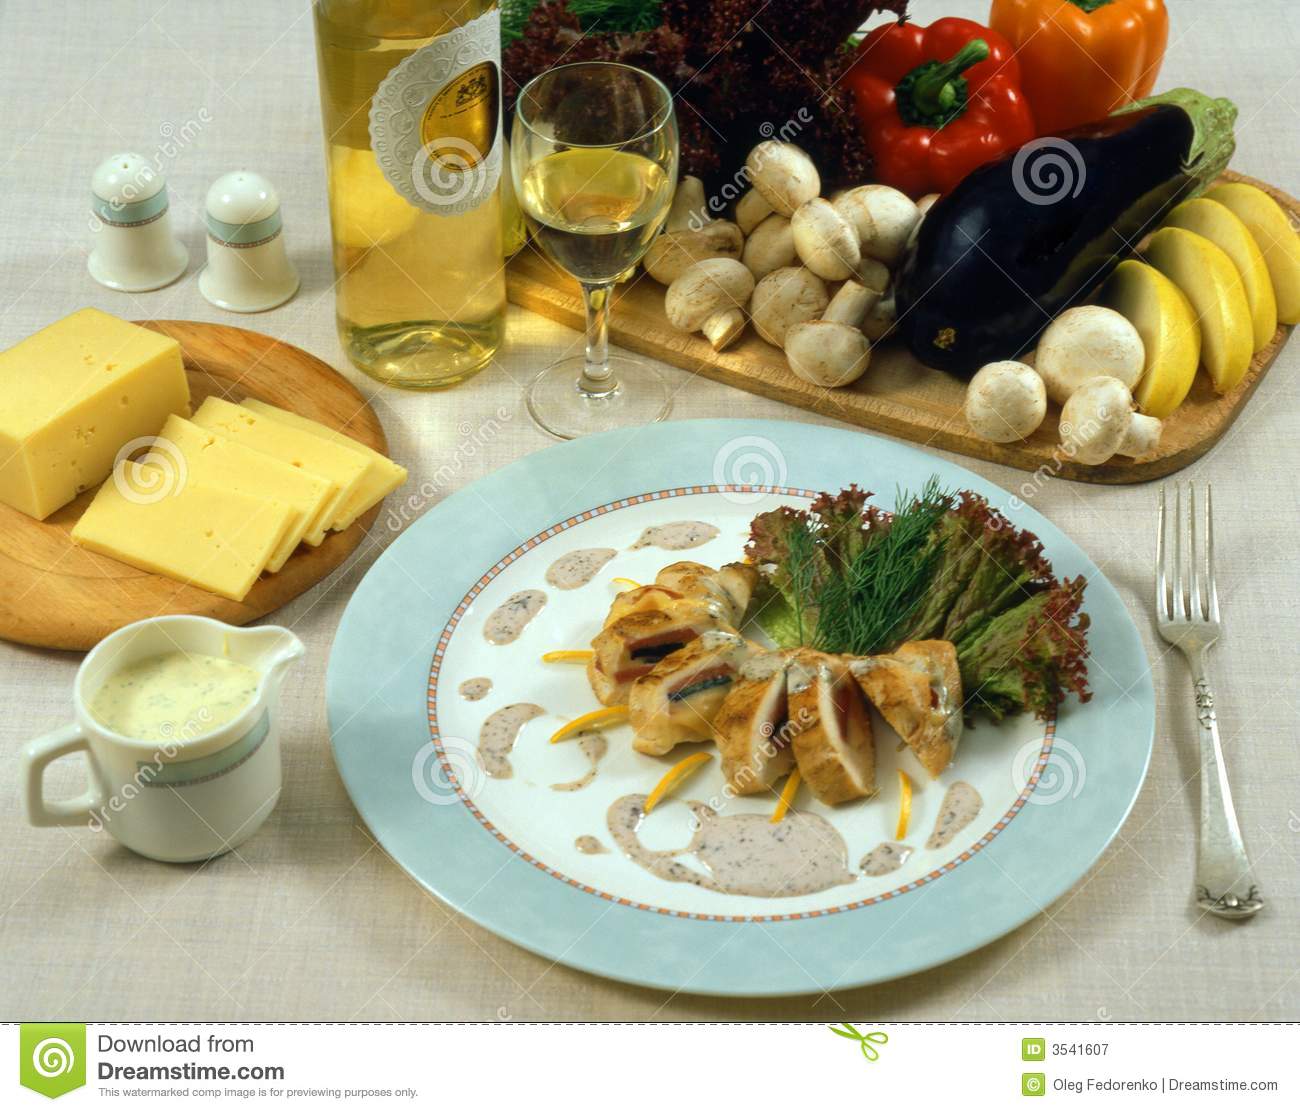 Elegant Dinner With Main Course Vegetables Cheese And White Wine